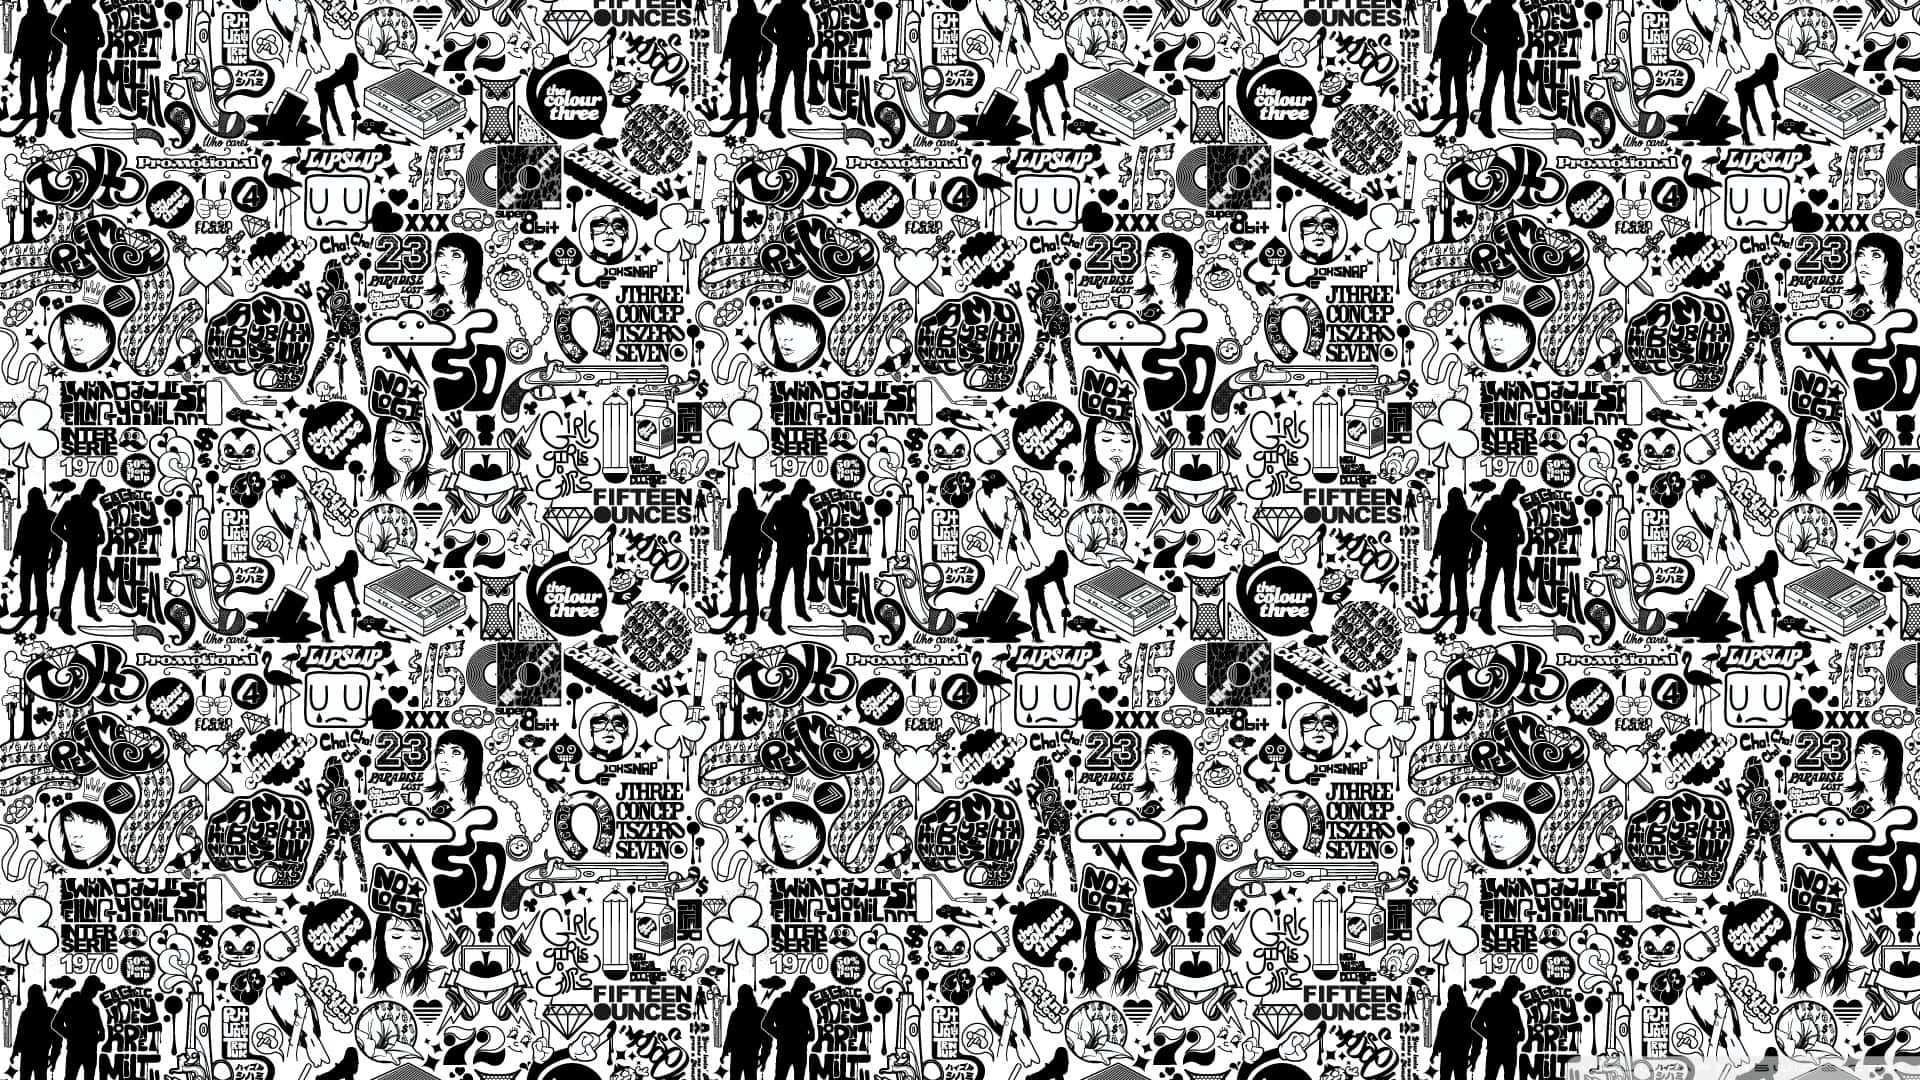 Marvel Superheroes in Black and White Wallpaper